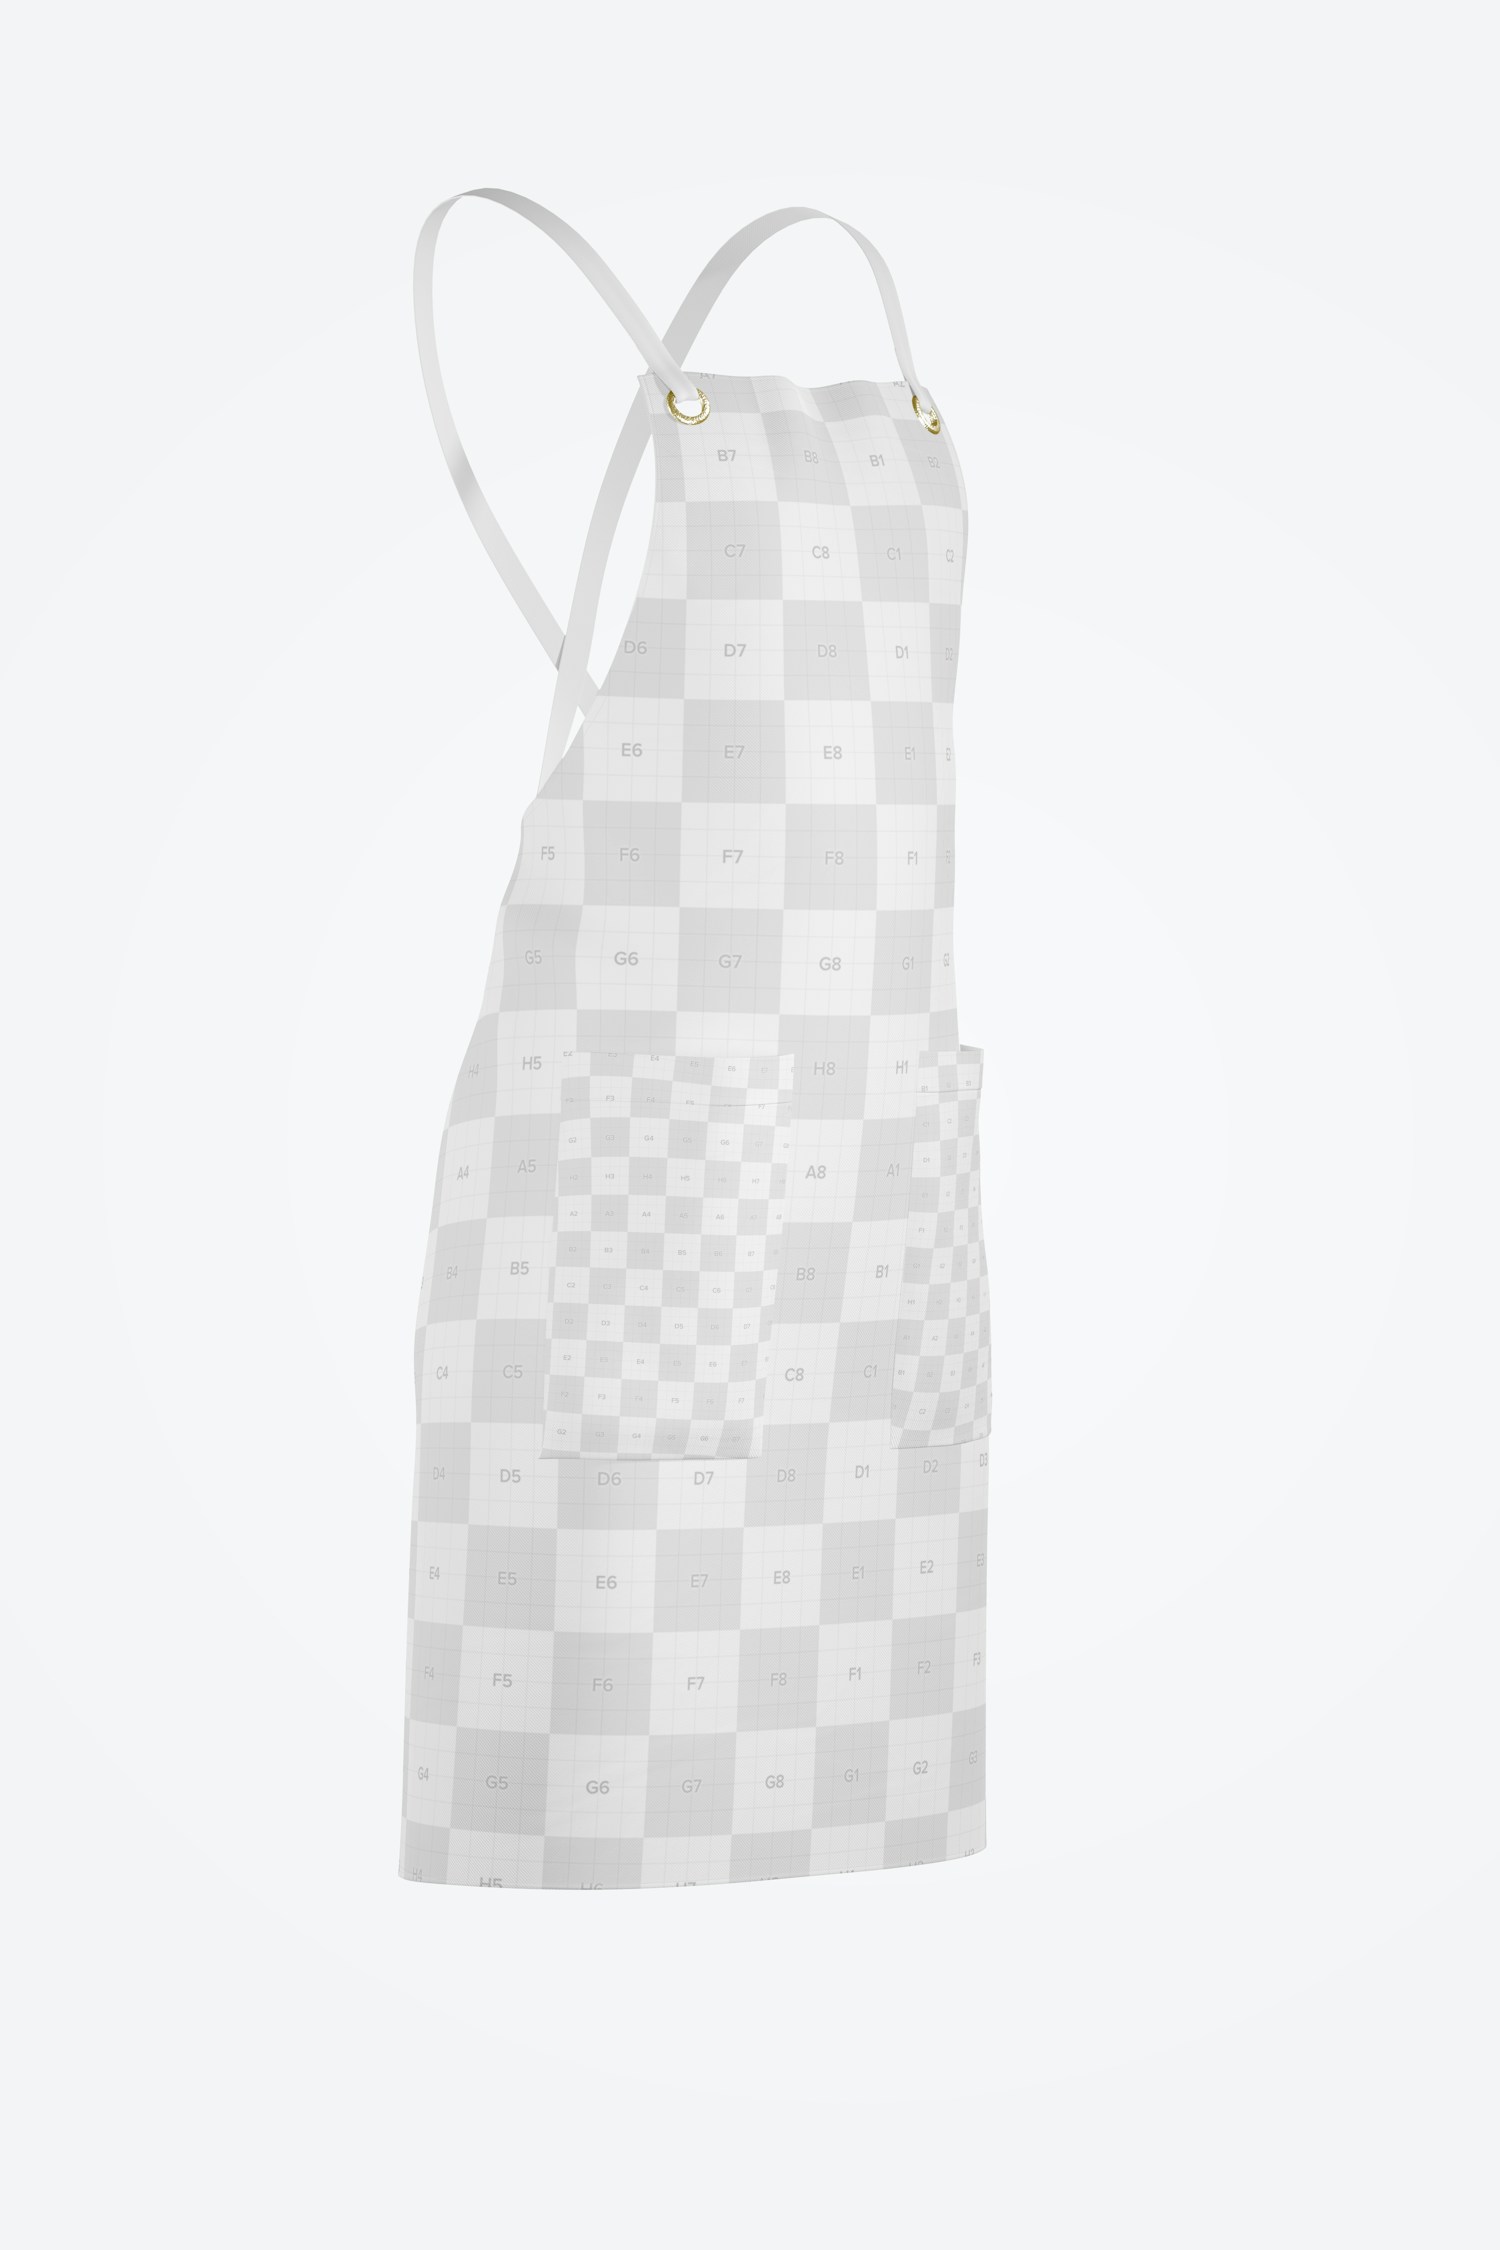 This mockup is isolated, you can move the apron into the scene.